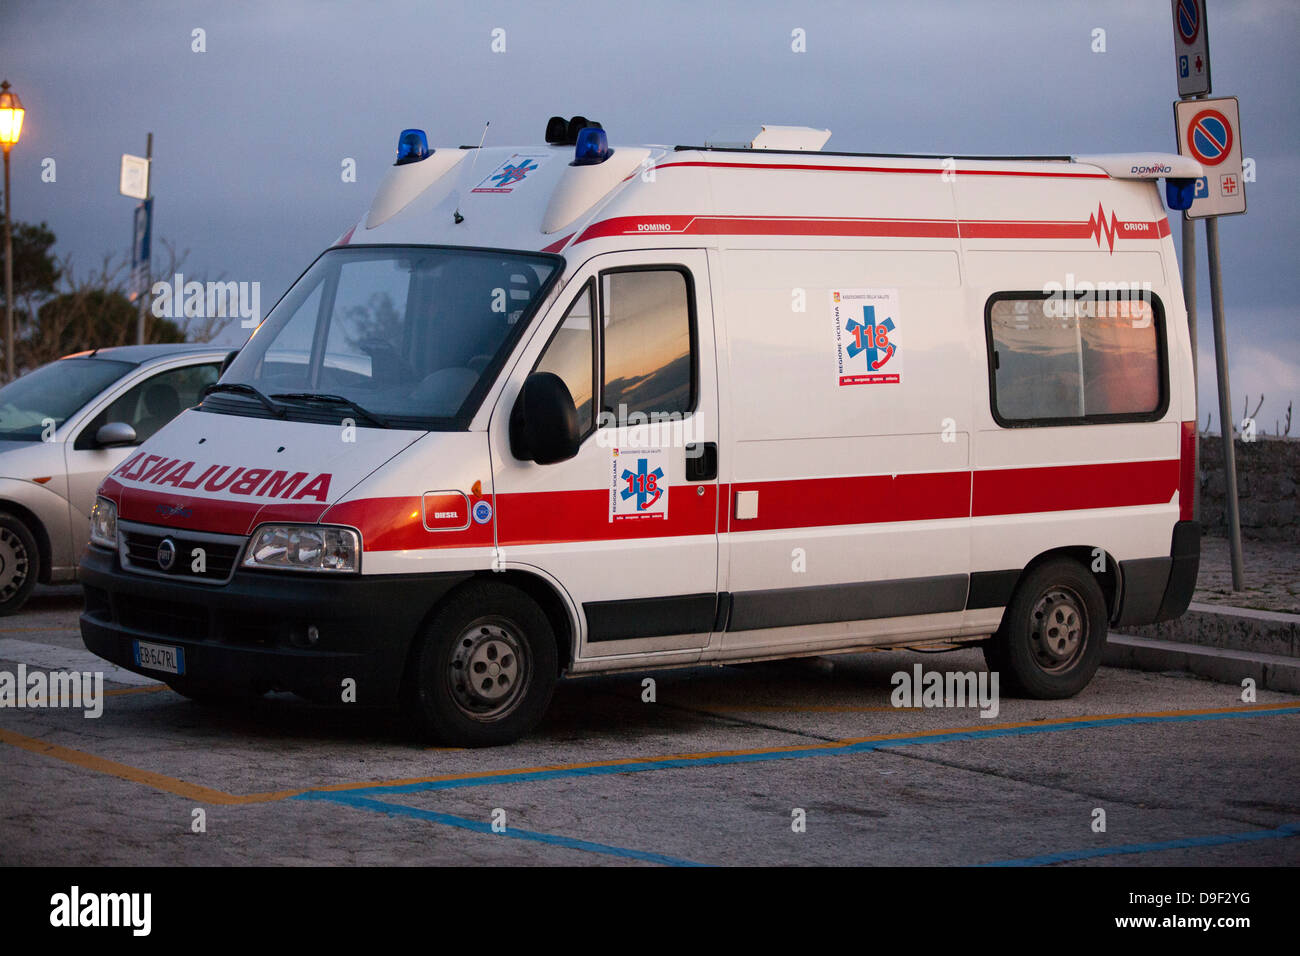 An Italian Ambulance in the town of Erice, Sicily. Stock Photo